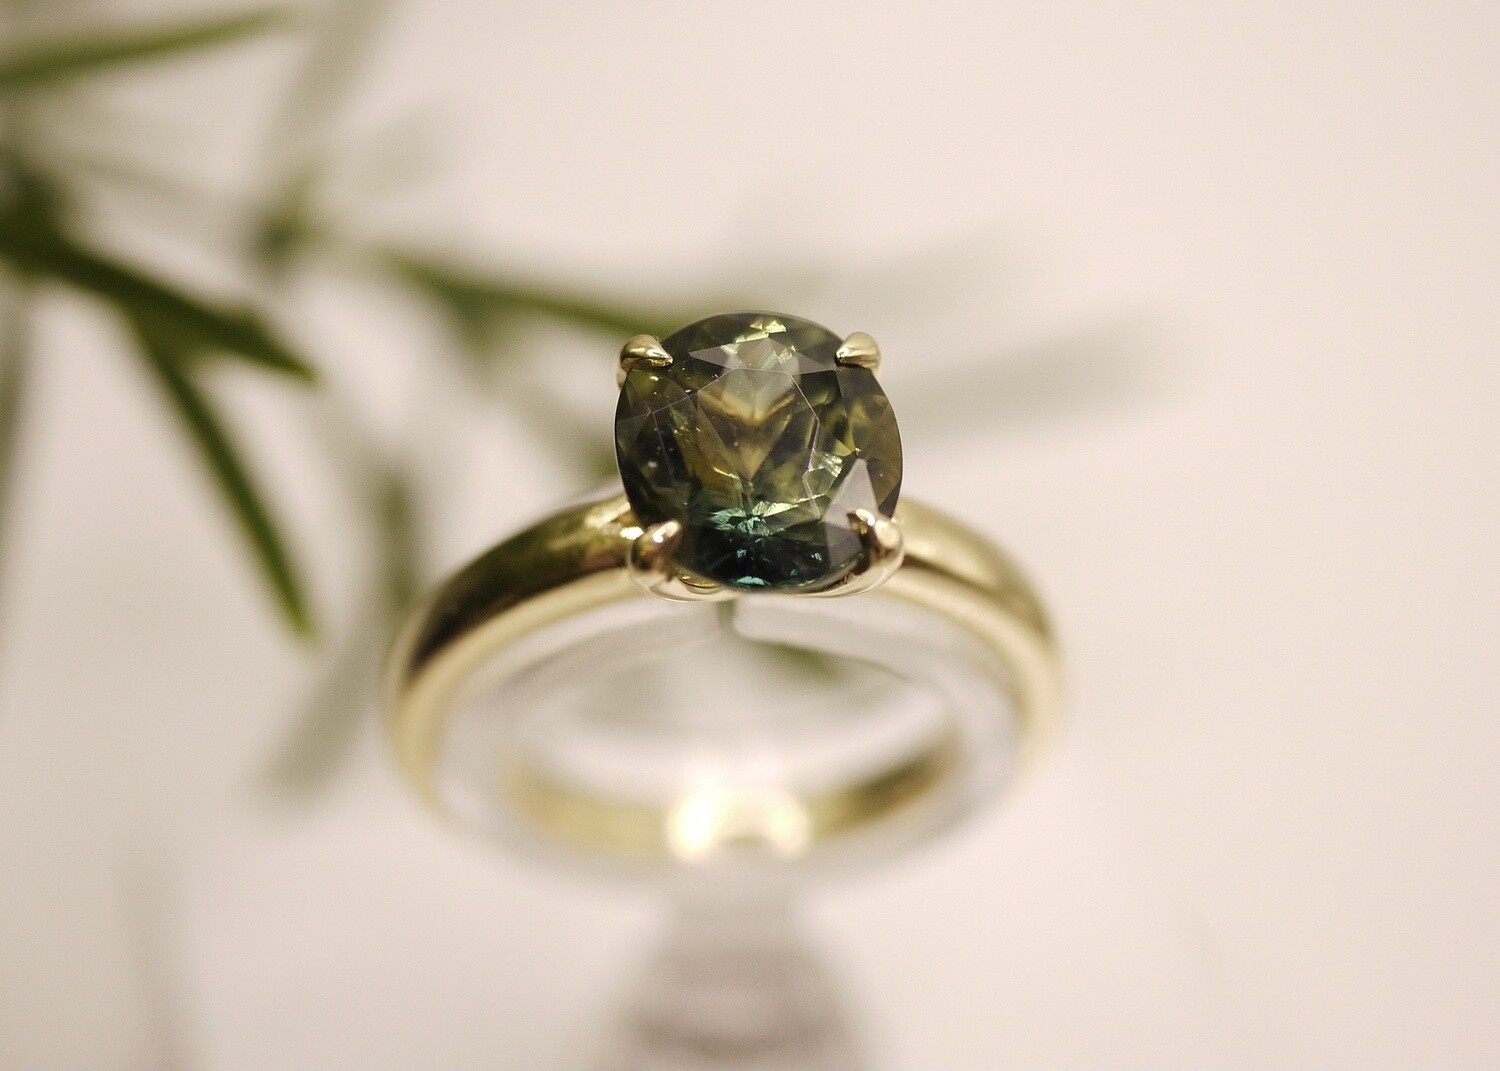 The ‘party’ sapphire ring